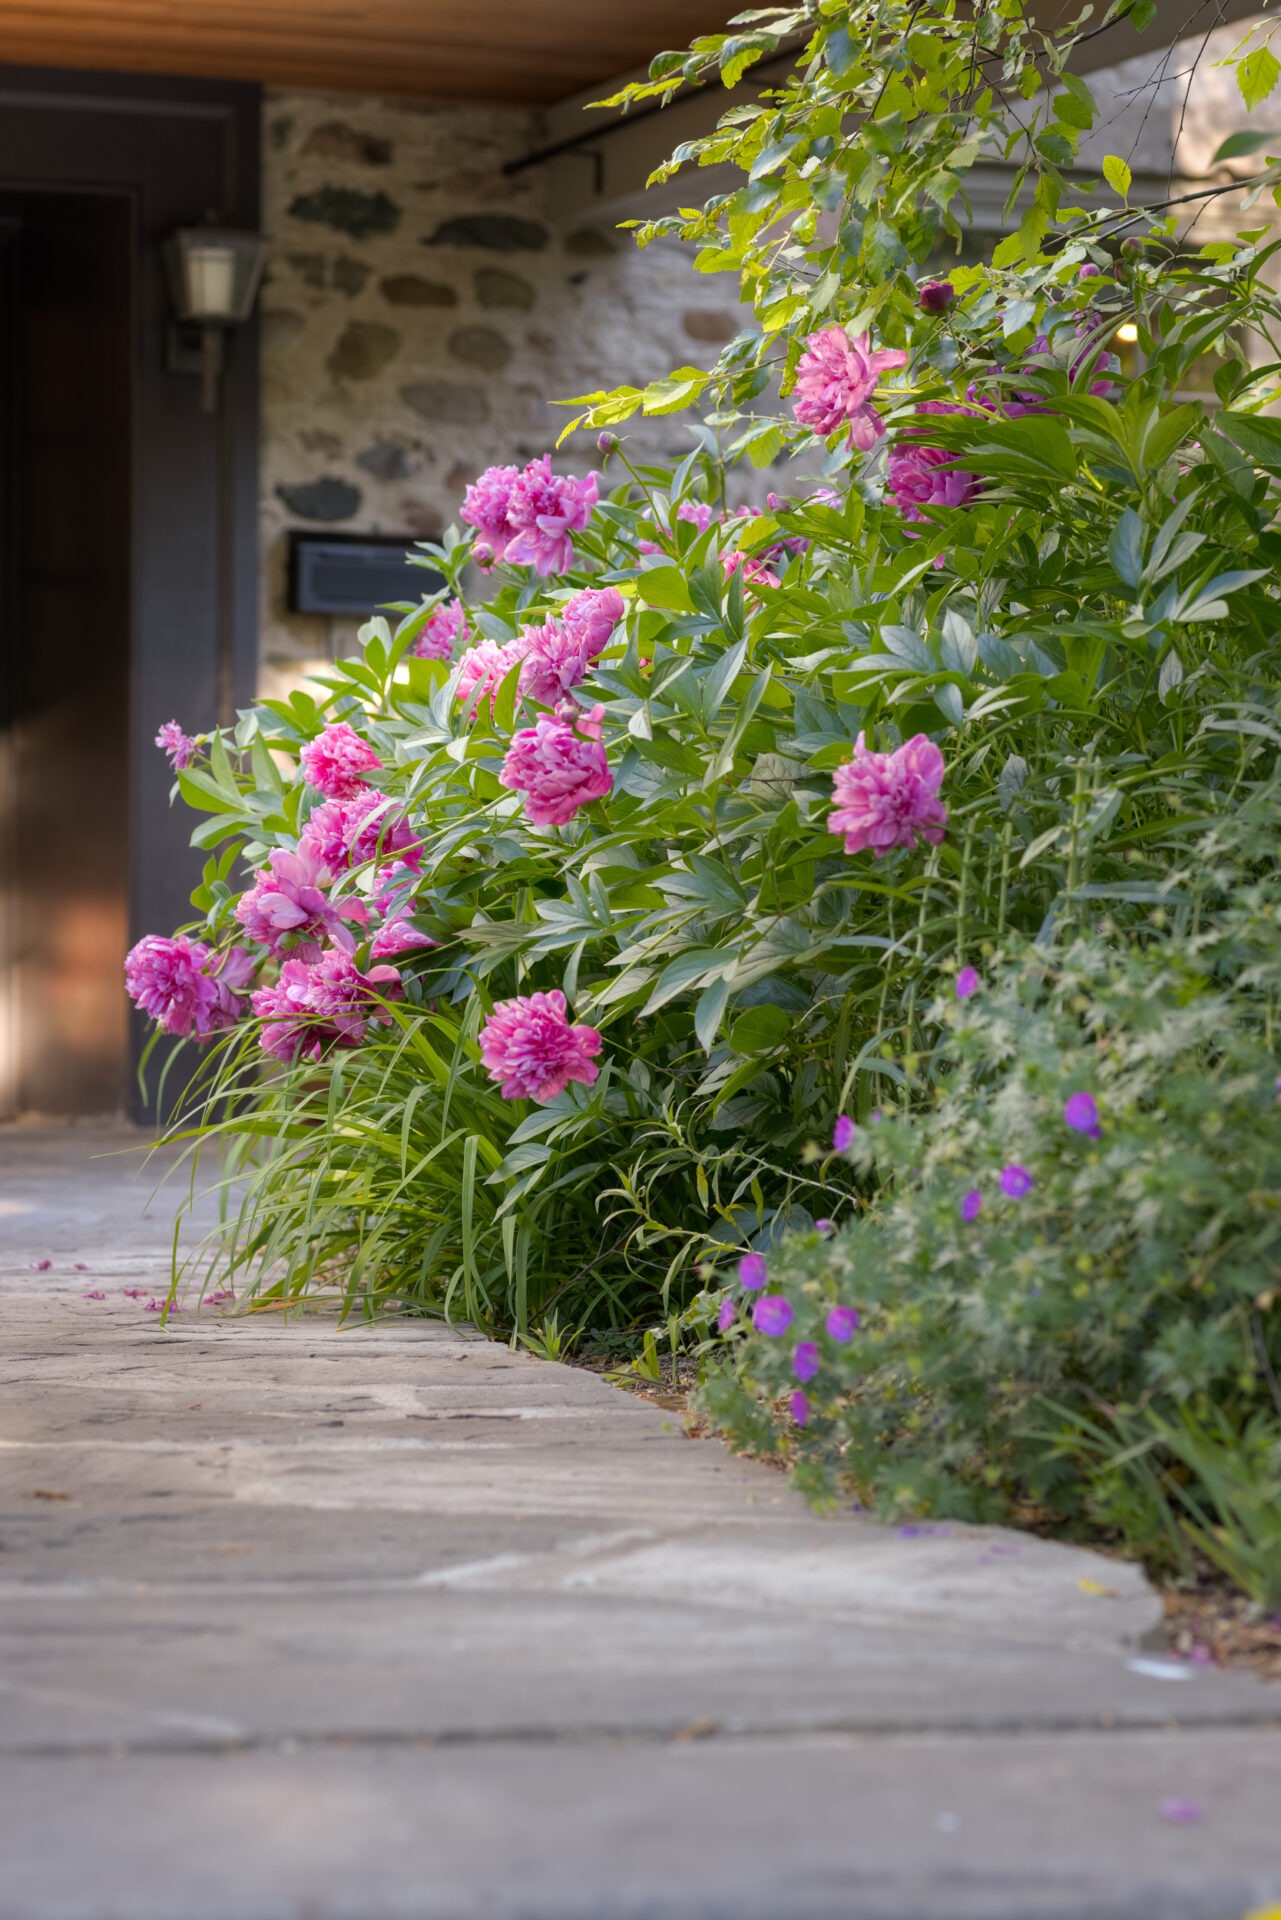 A stone pathway lined with vibrant pink peonies and green foliage leads to a house with a stone exterior and a dark entrance.